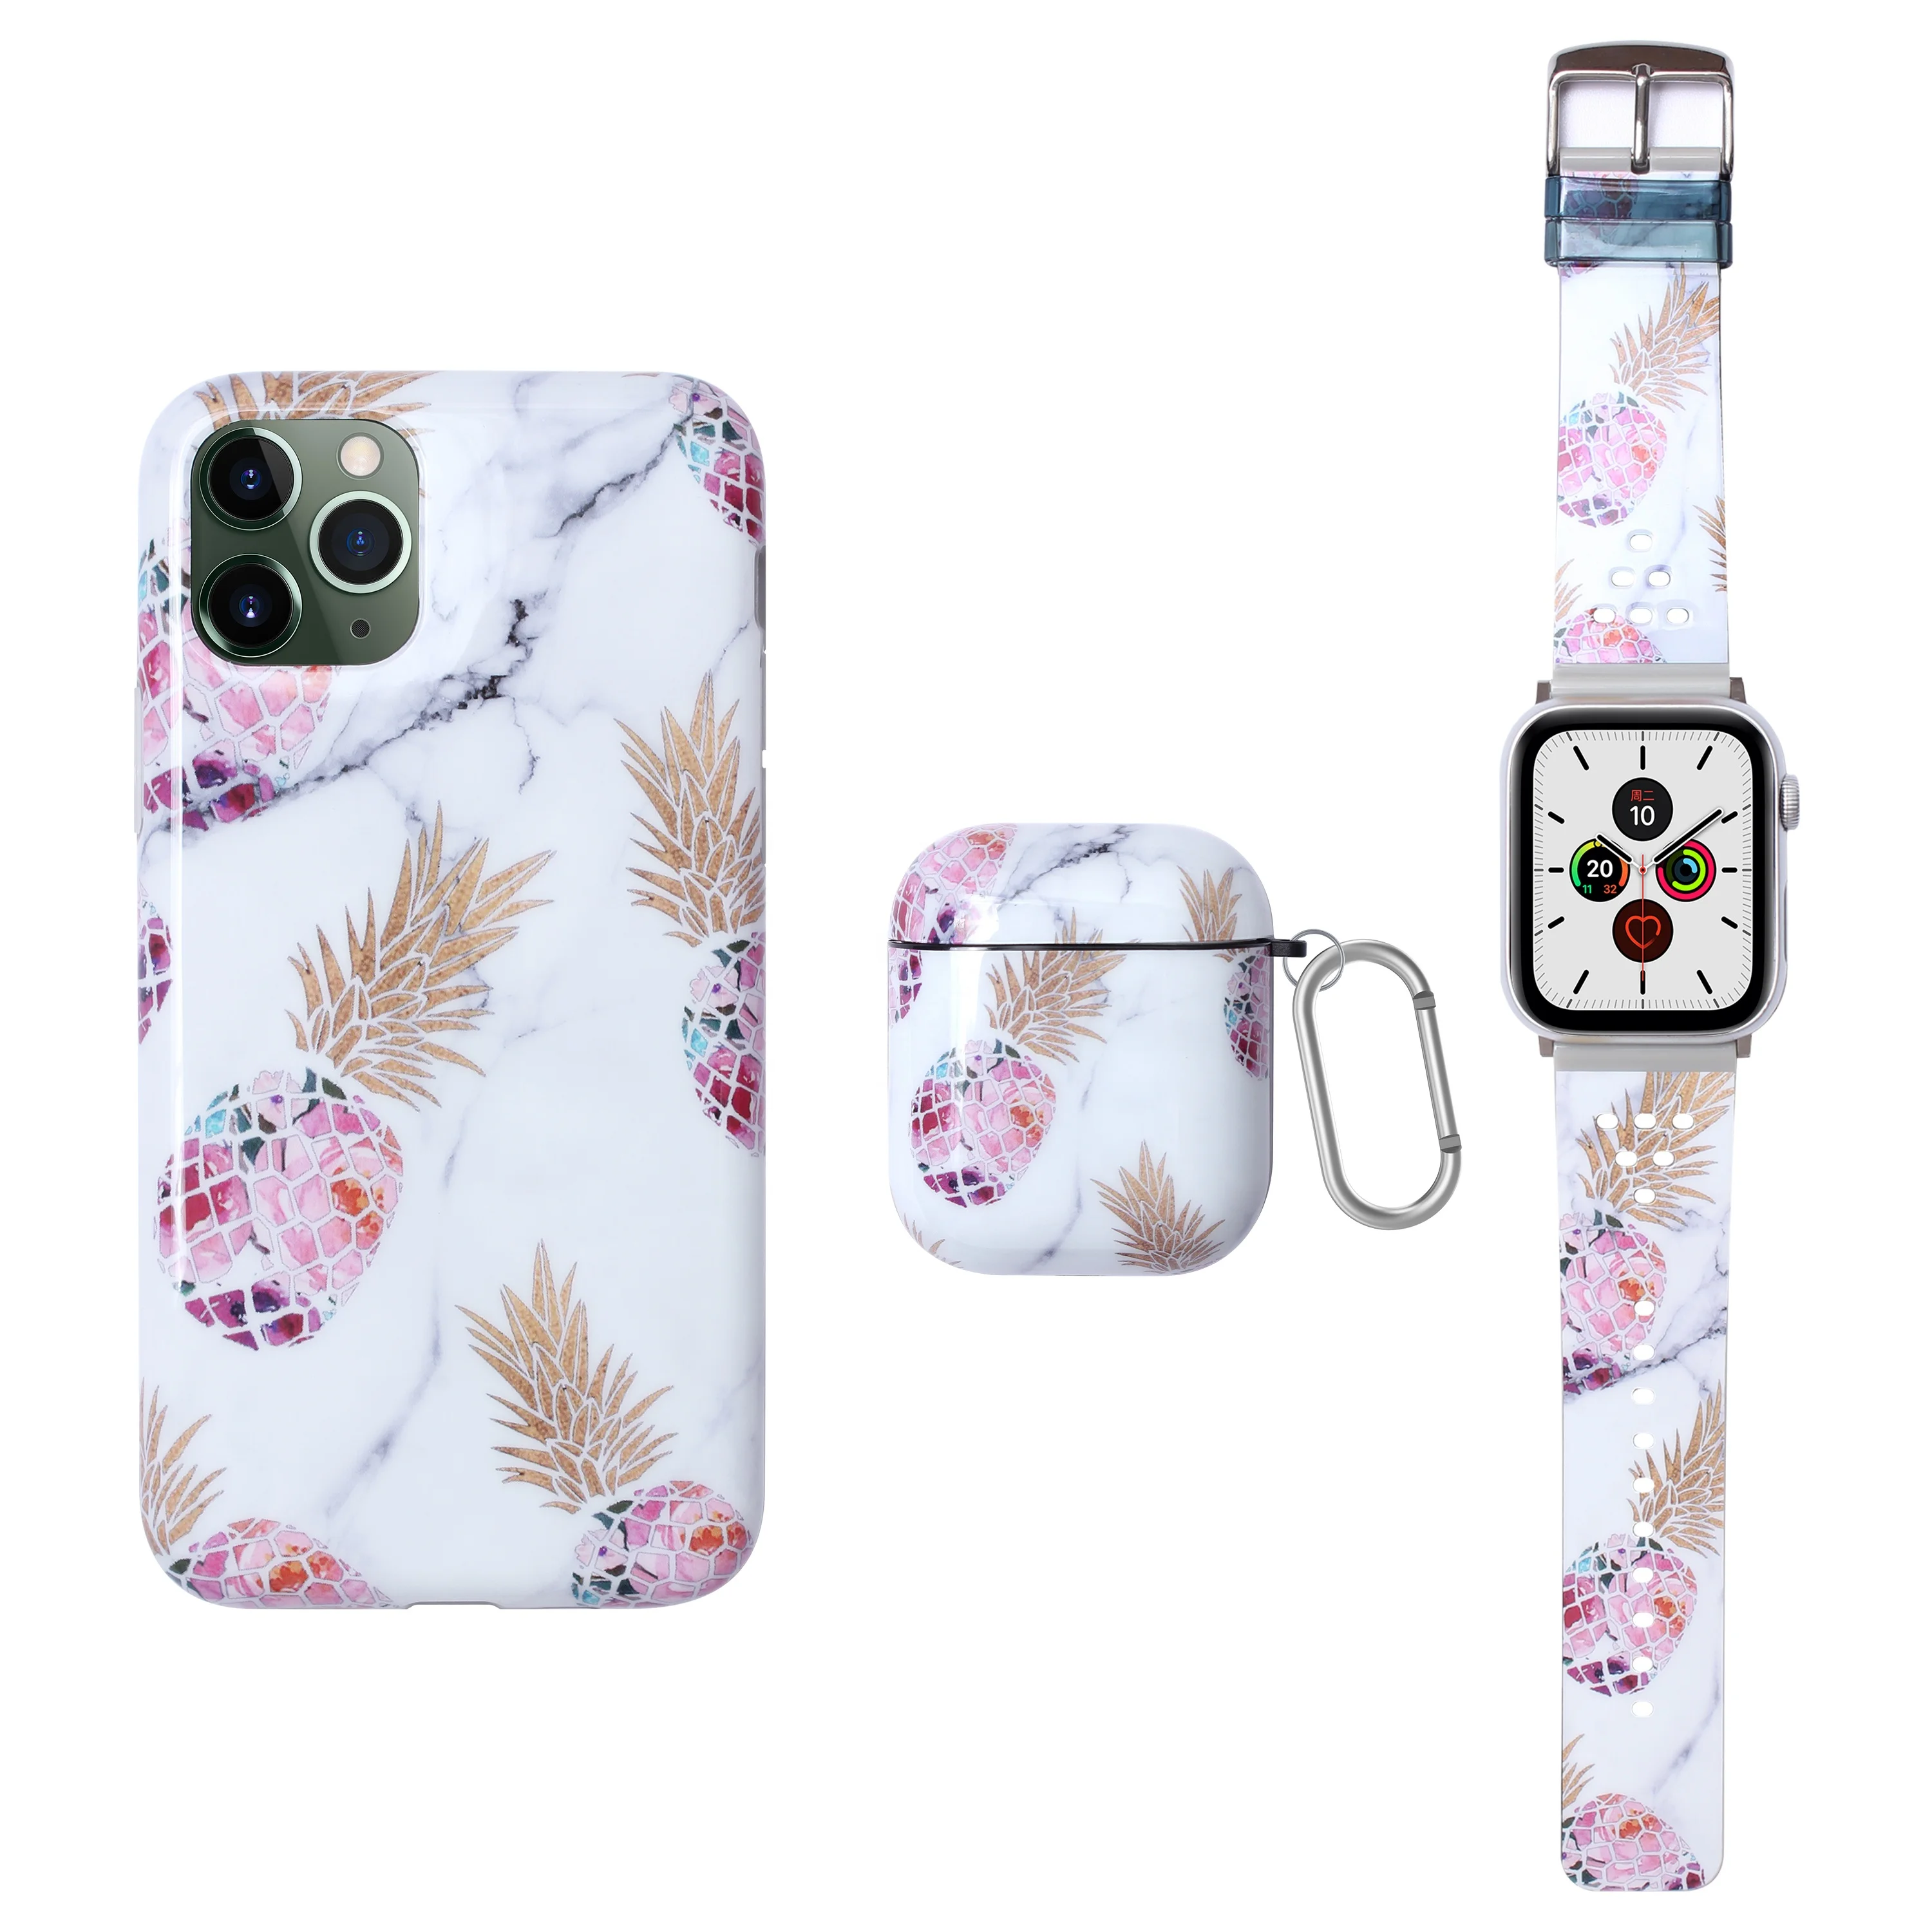 

Nice design 3 in 1 set Pineapple IMD case for iPhone, case for airpods, watch band straps for apple watch band 38mm/40mm 42/44mm